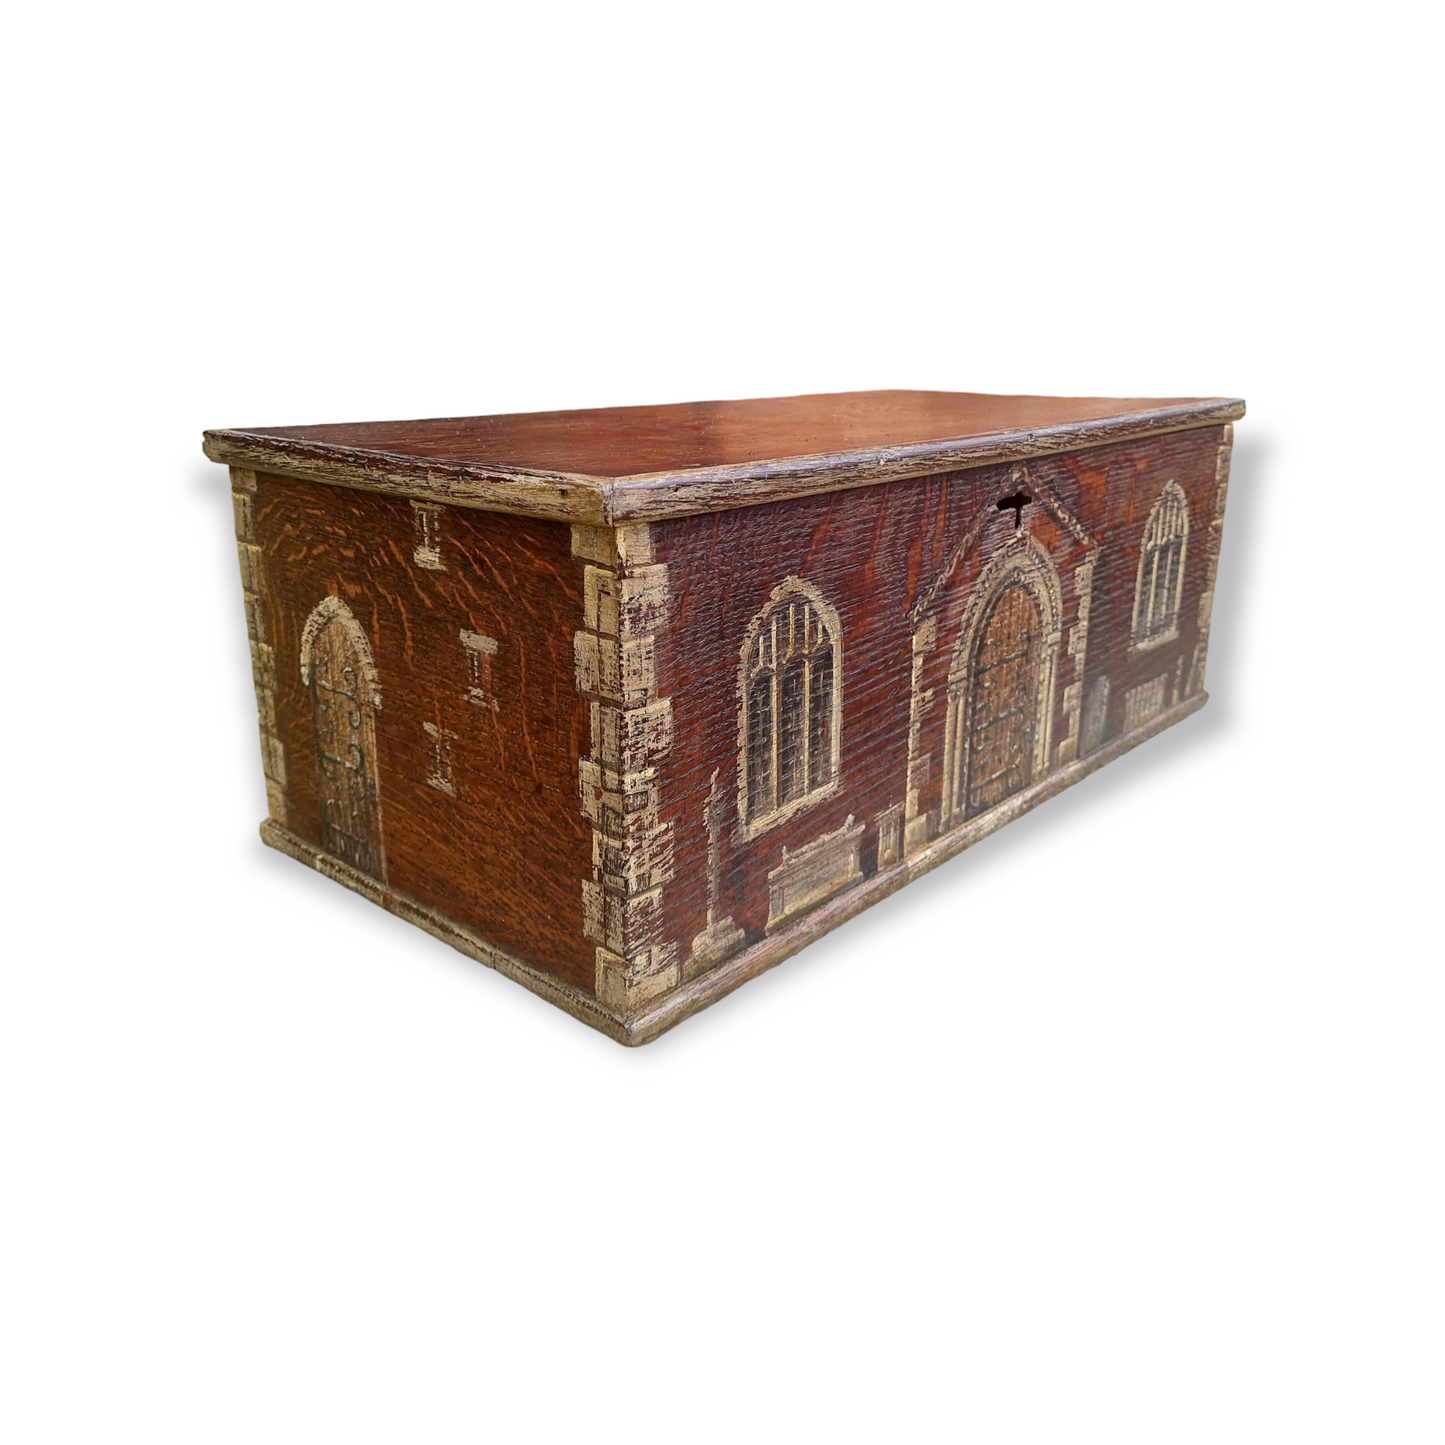 Early 19th Century English Antique Oak Boarded Box With Folk Art Painted Gothic Scene